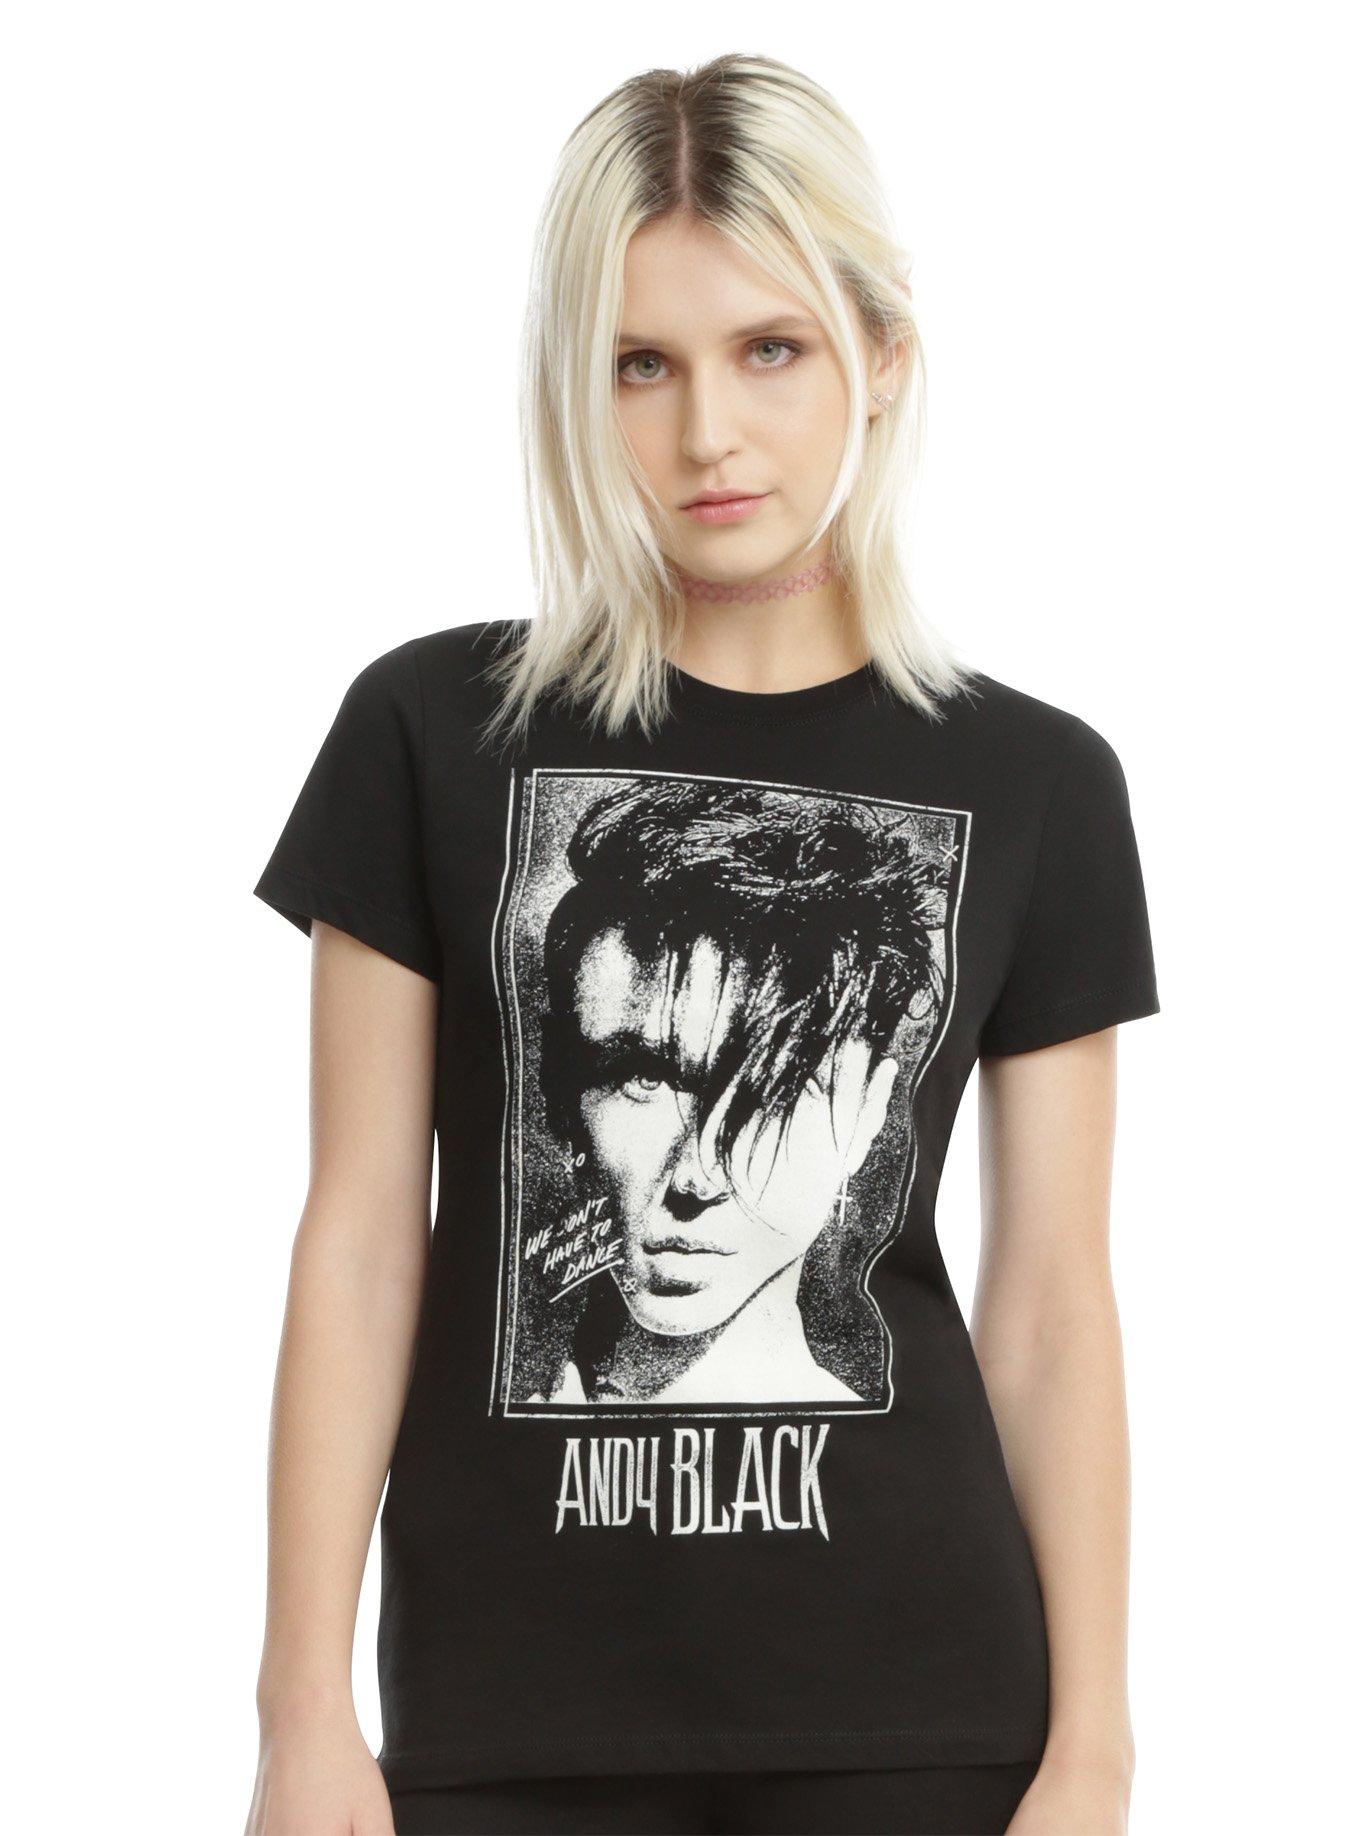 Andy Black We Don't Have To Dance Girls T-Shirt, BLACK, hi-res